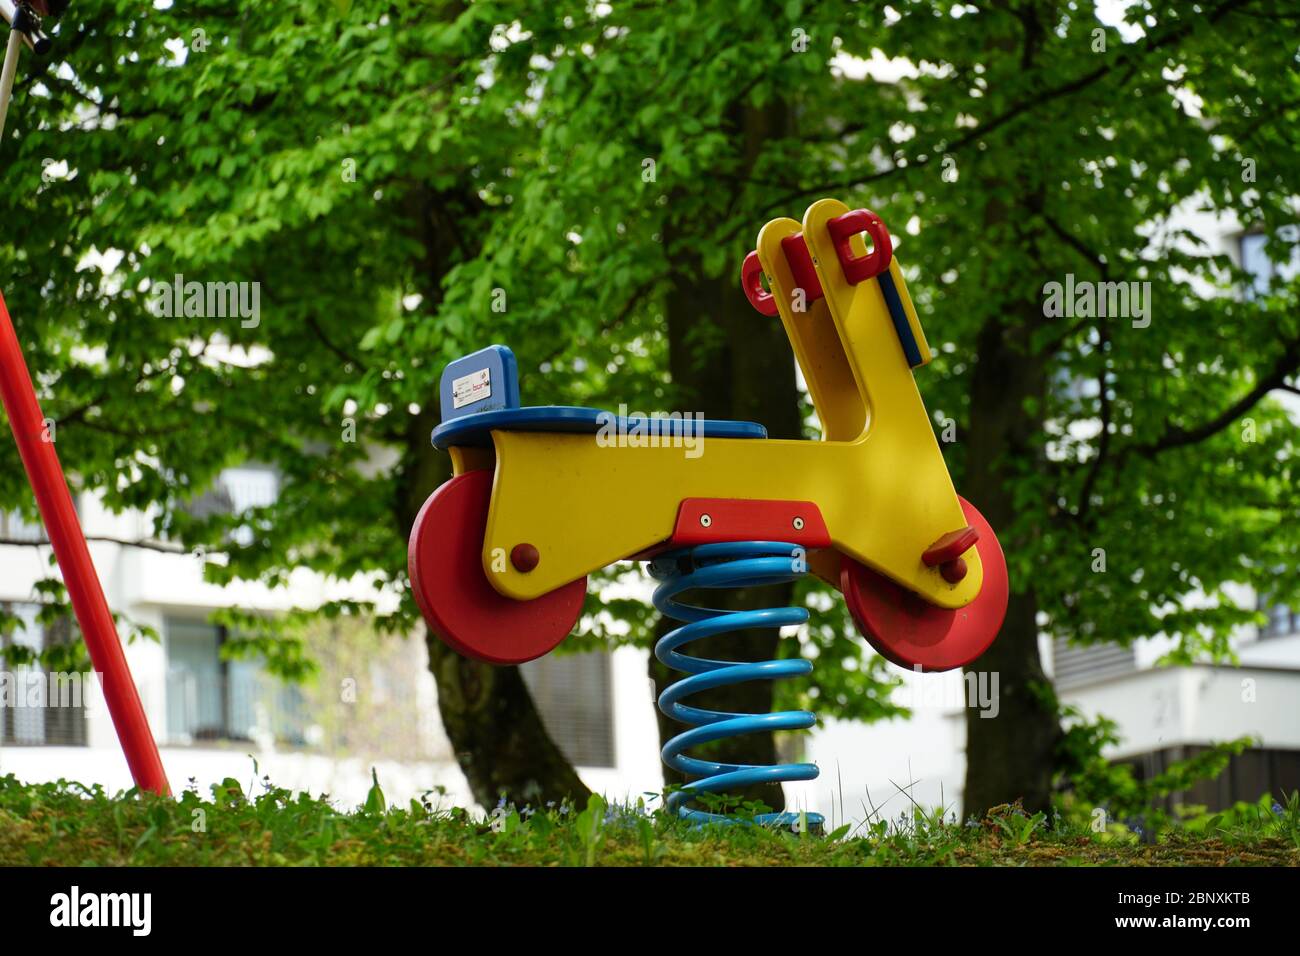 a rocking motorcycle on a spring, a stylized wooden toy in red and yellow for small children on a thick metal spring stepped in the ground on a yard Stock Photo